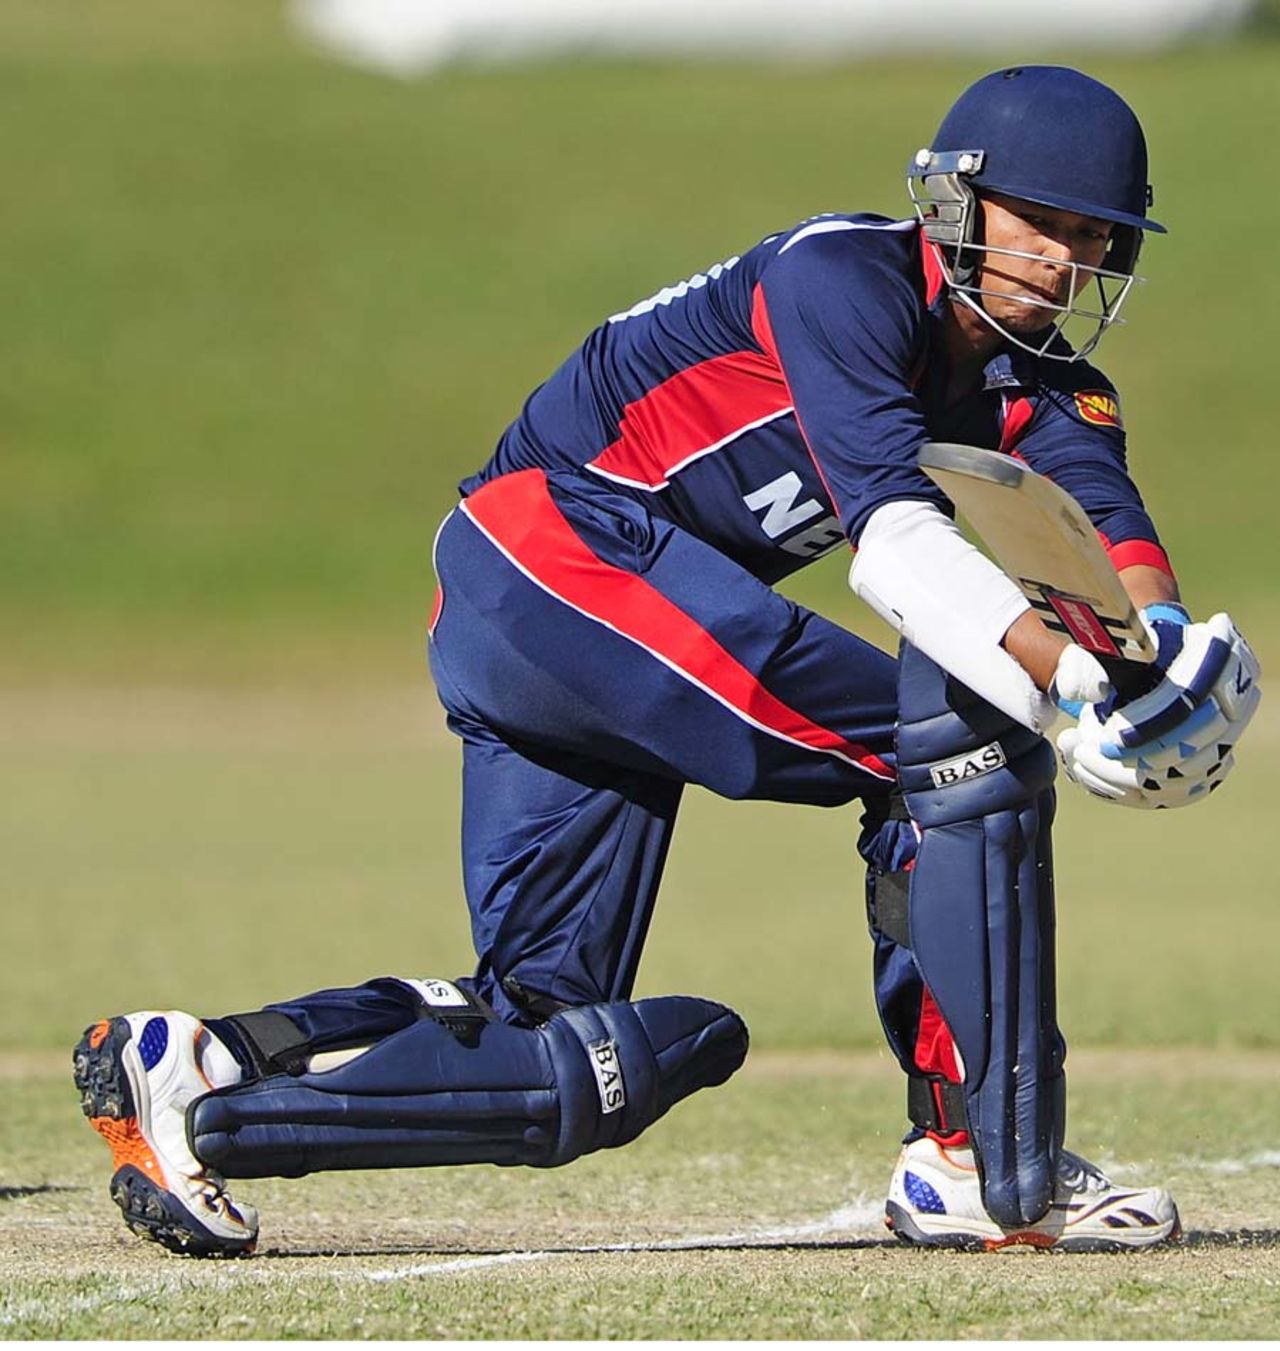 Rahul Vishwakarma top-scored for Nepal with 32, Ireland v Nepal, ICC Under-19 World Cup, Group A, Townsville, August 15, 2012